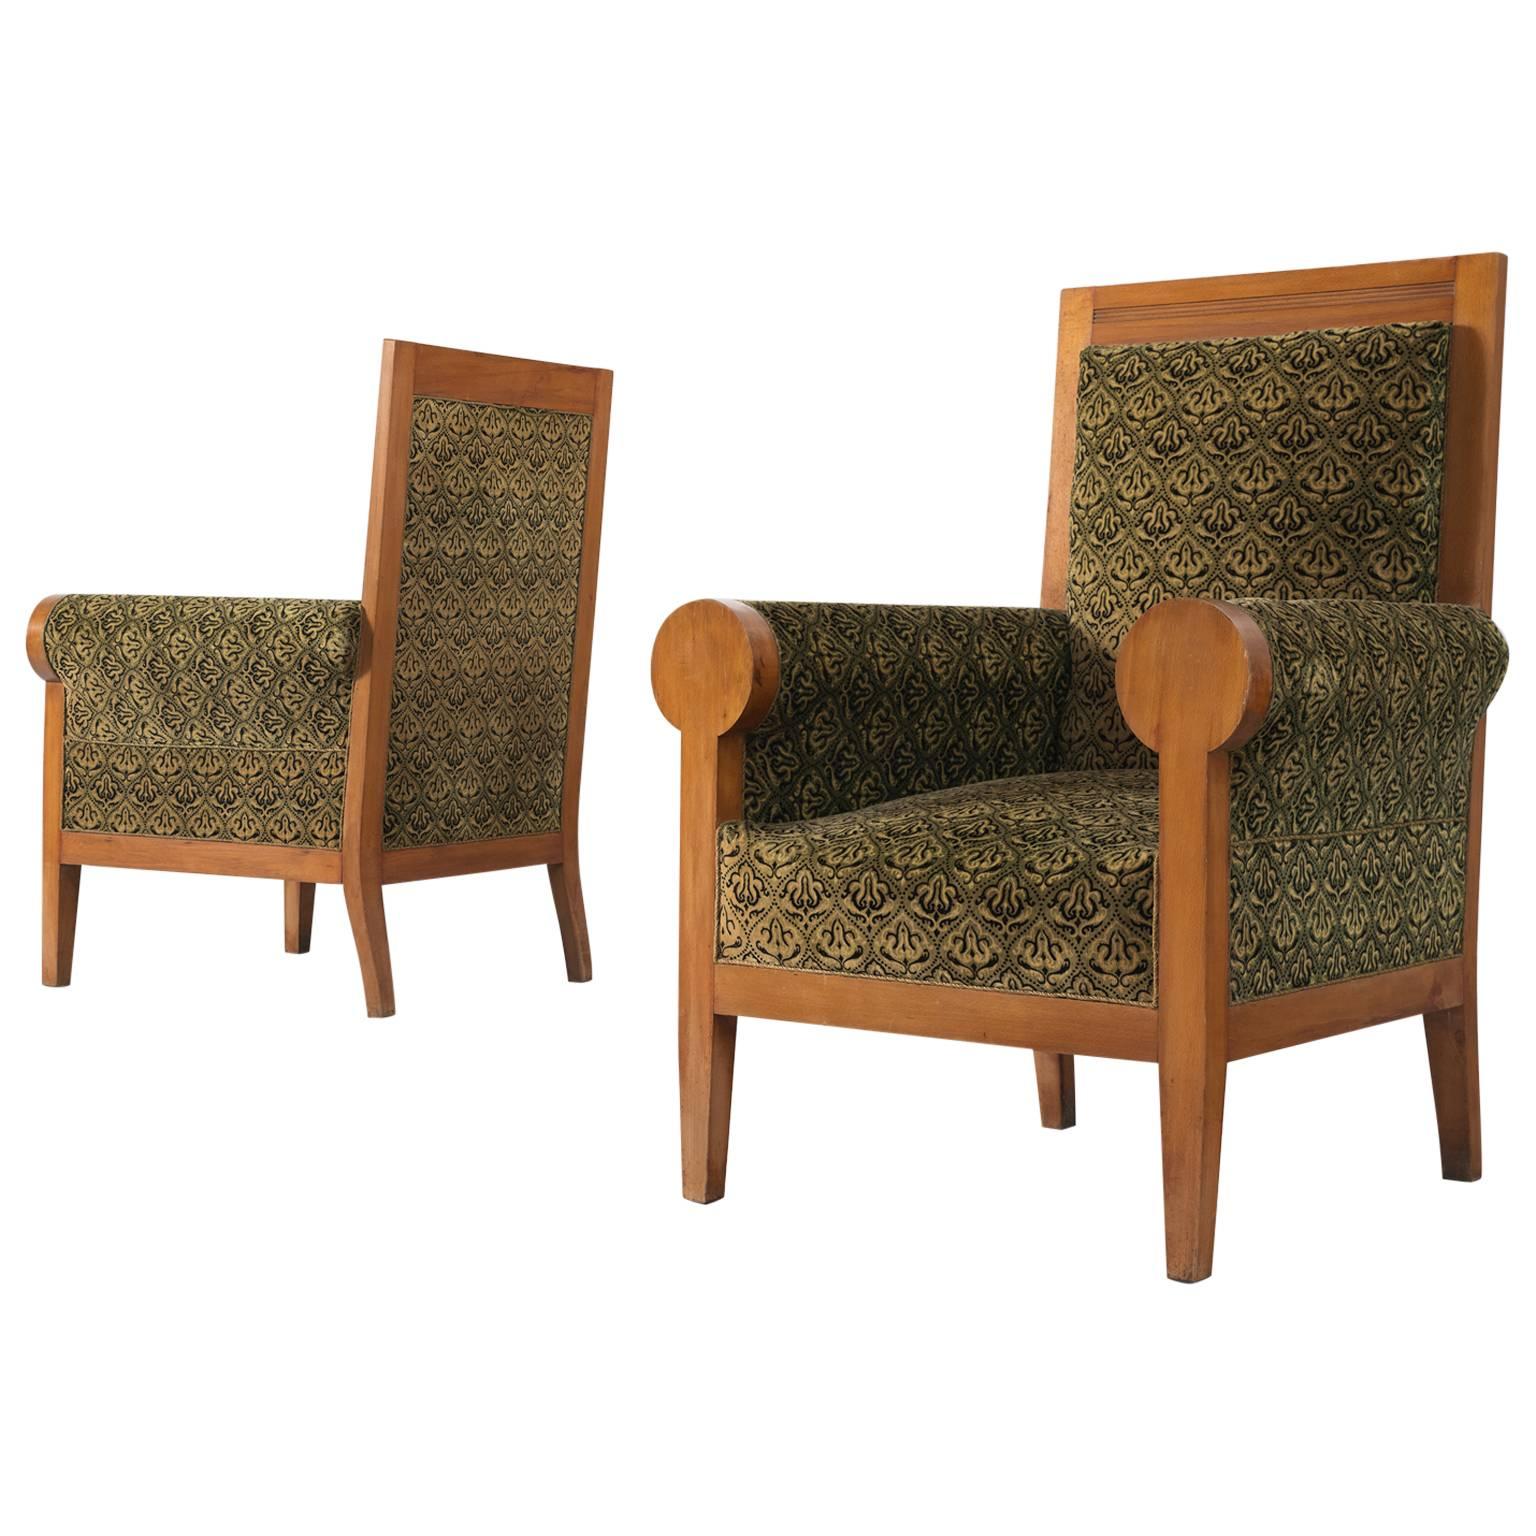 Pair of Italian High Back Armchairs in Green Fabric Upholstery